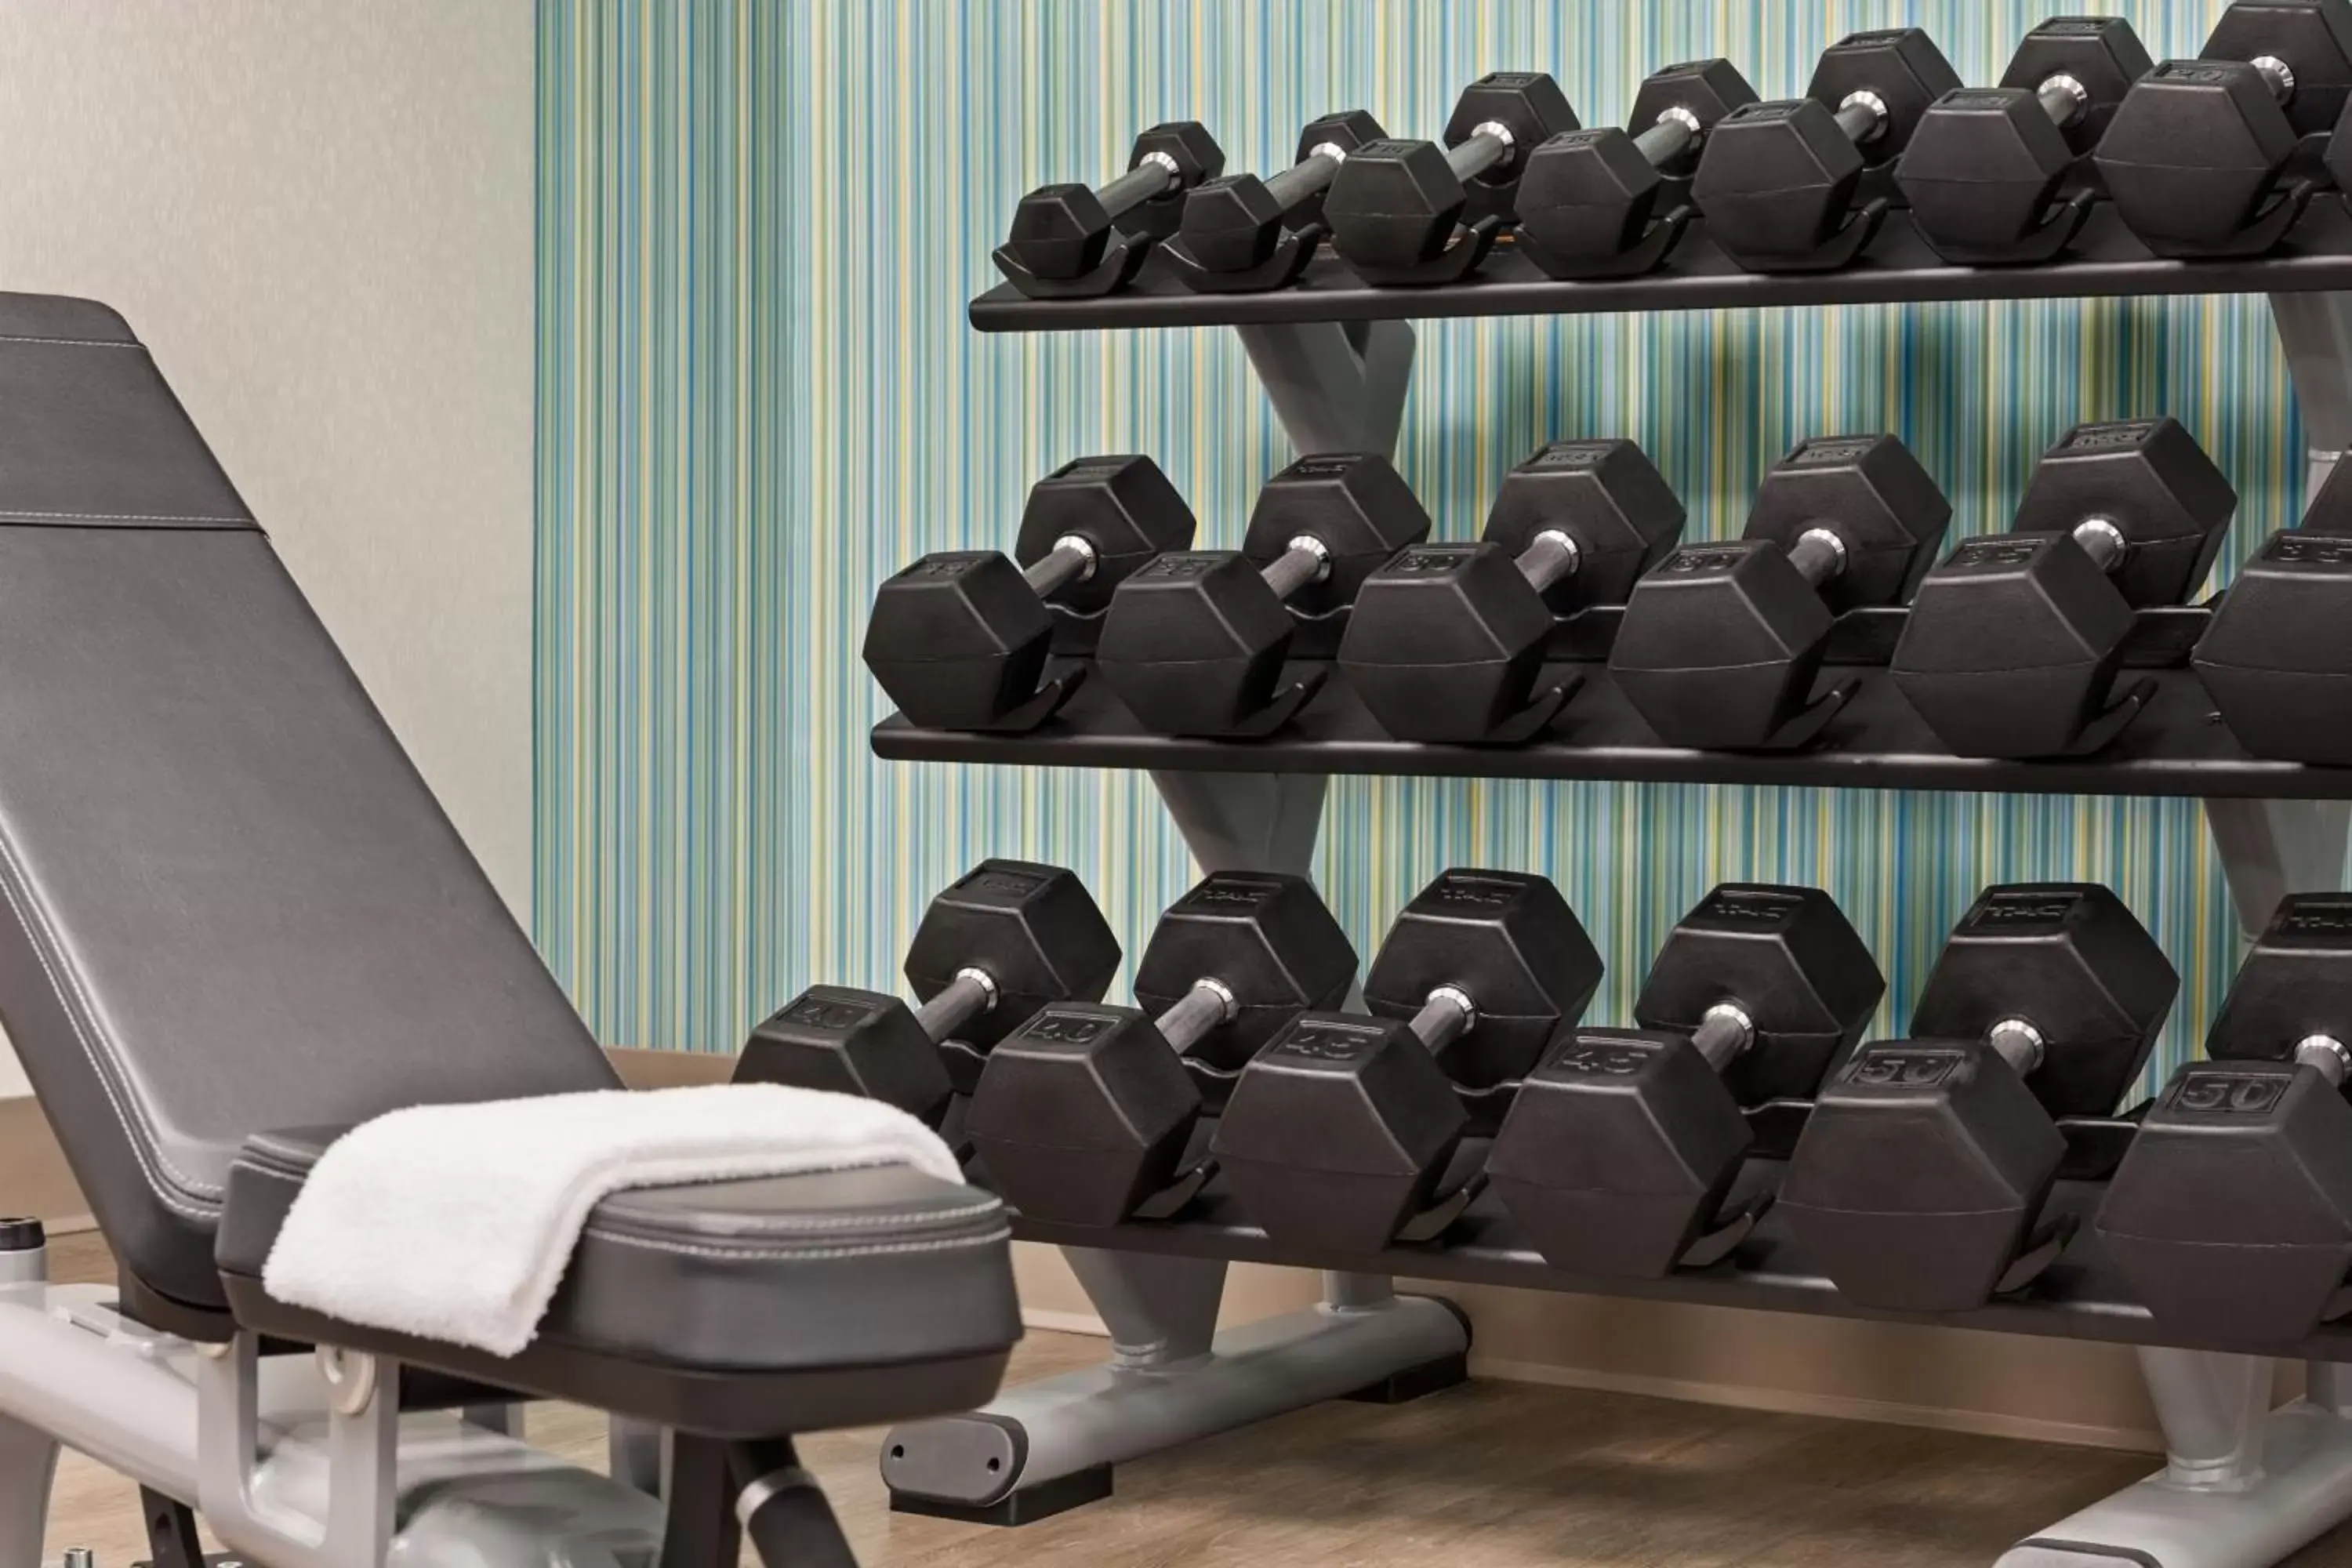 Fitness centre/facilities, Fitness Center/Facilities in Holiday Inn Express Hotel & Suites Greenville-Downtown, an IHG Hotel